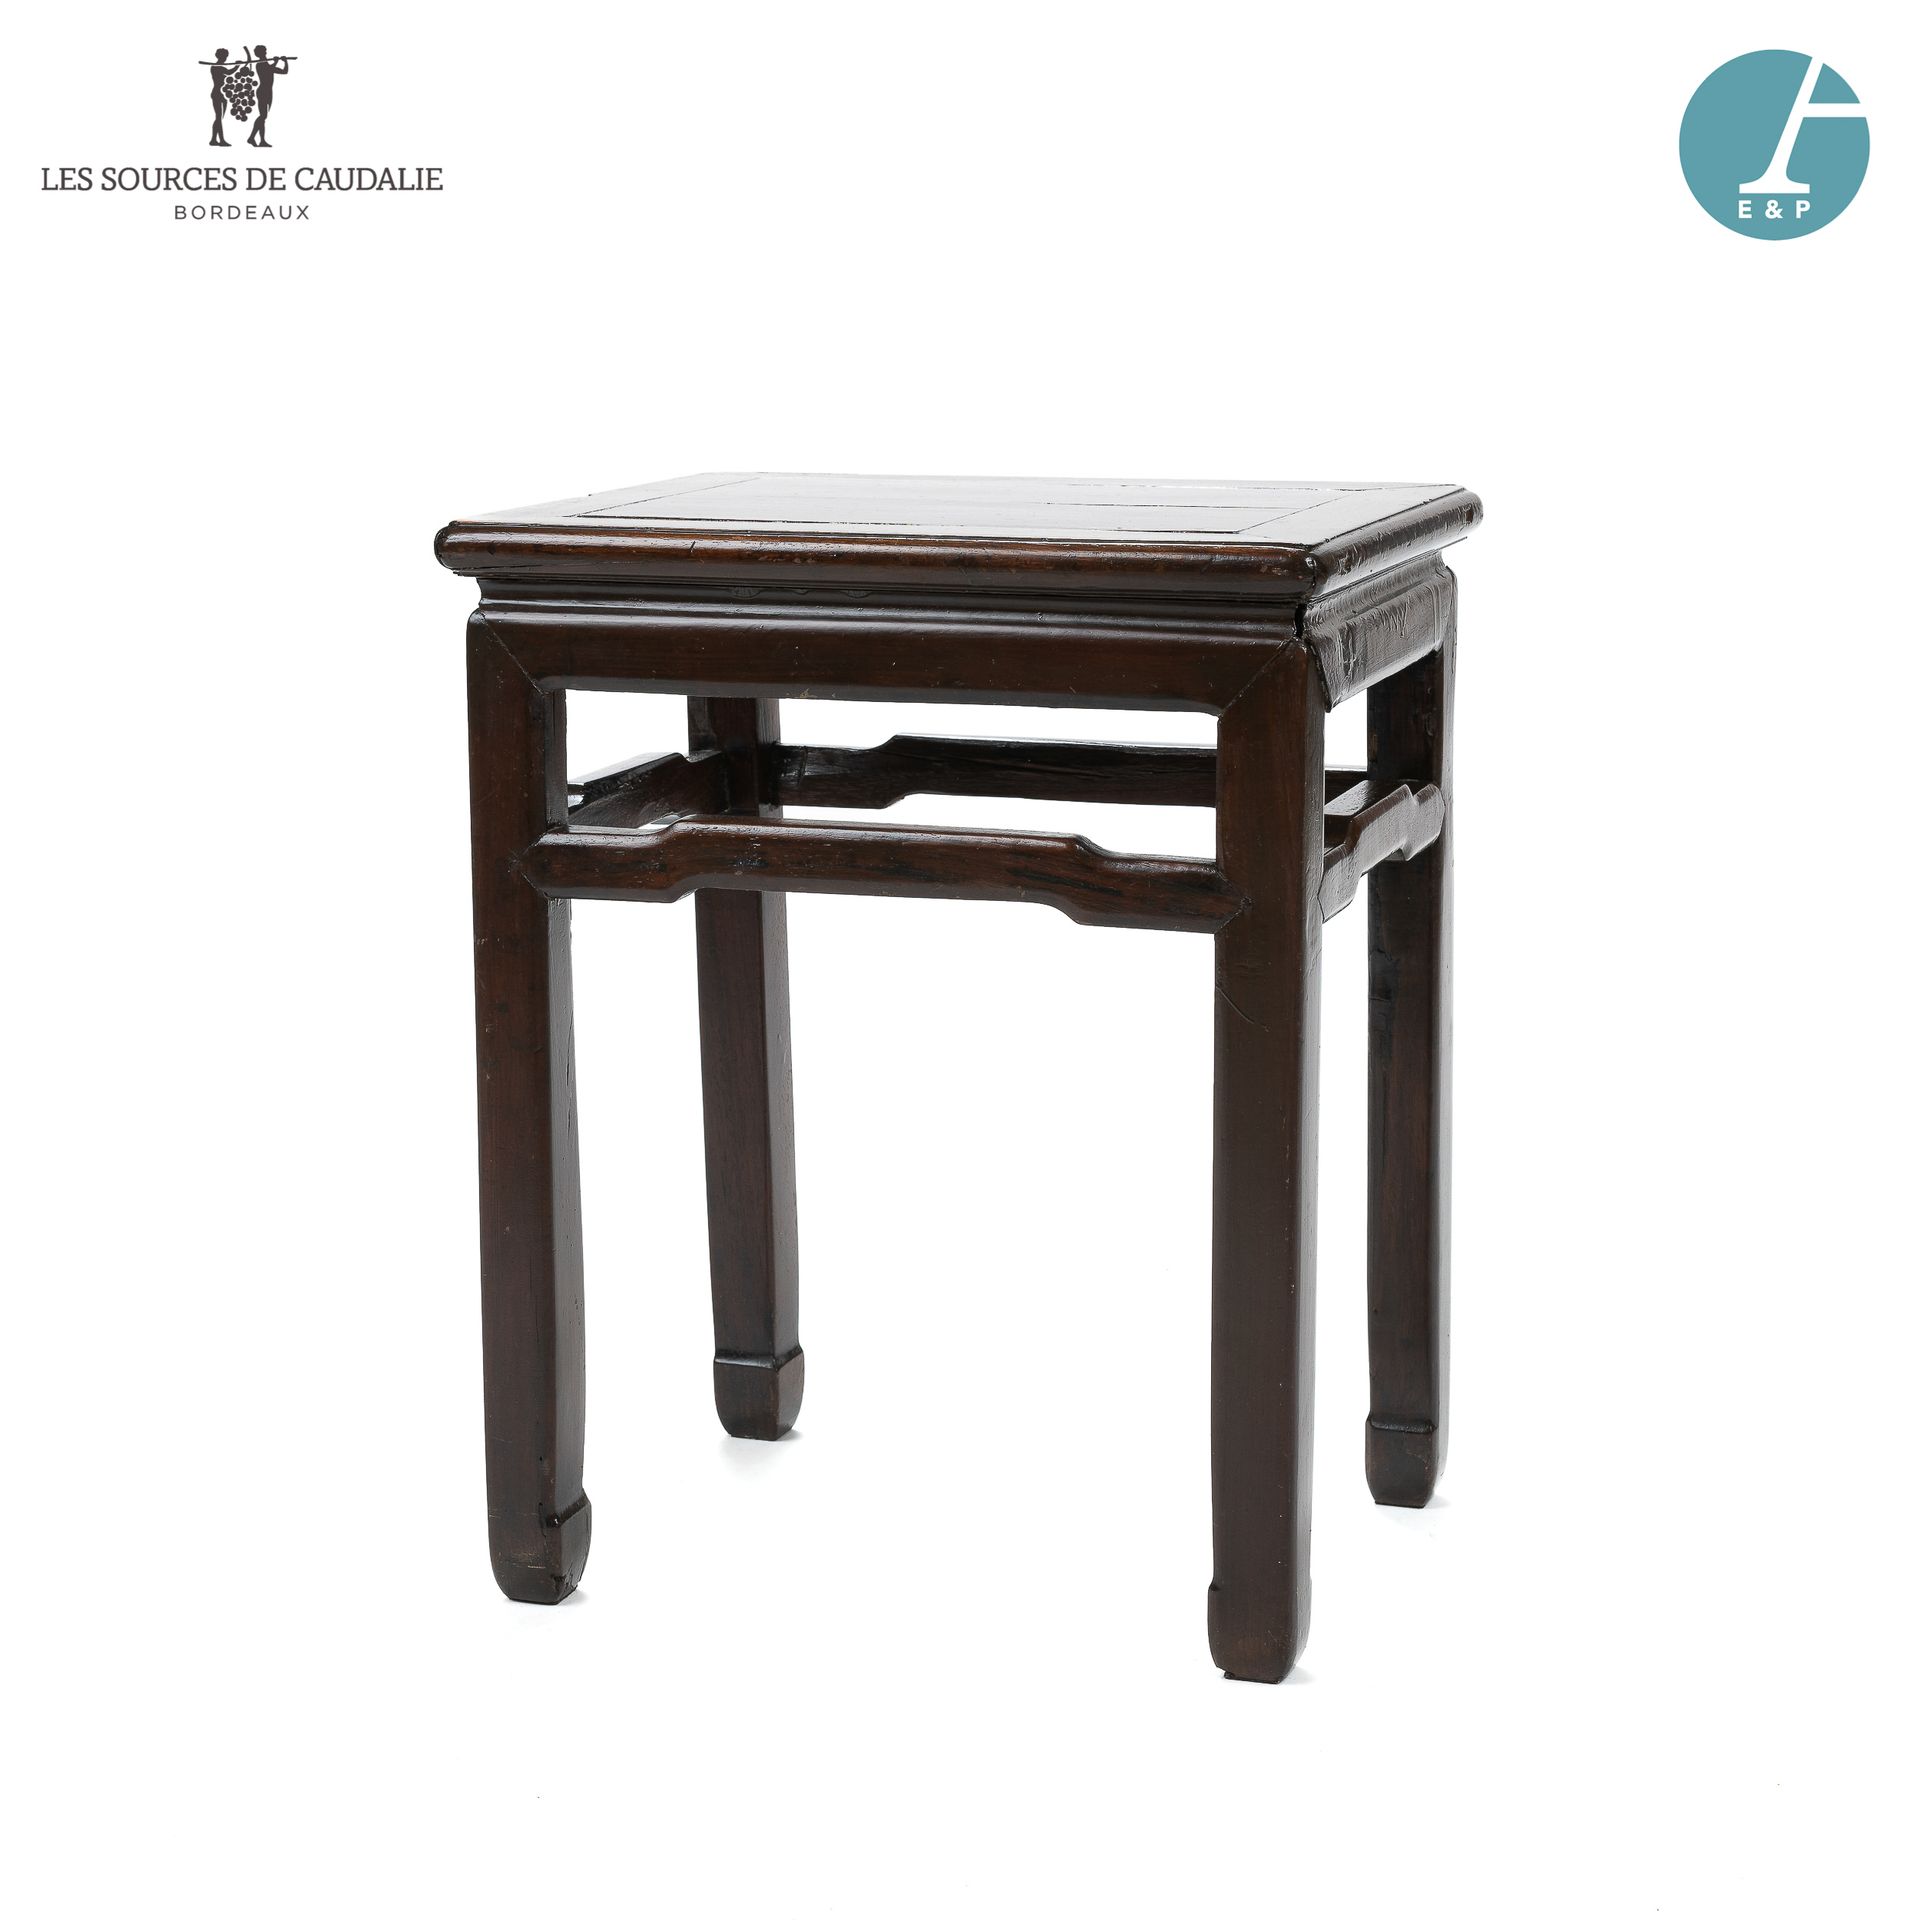 Null From the room n°16 "Les Navigateurs

Mahogany stained wood stool, in the Ch&hellip;